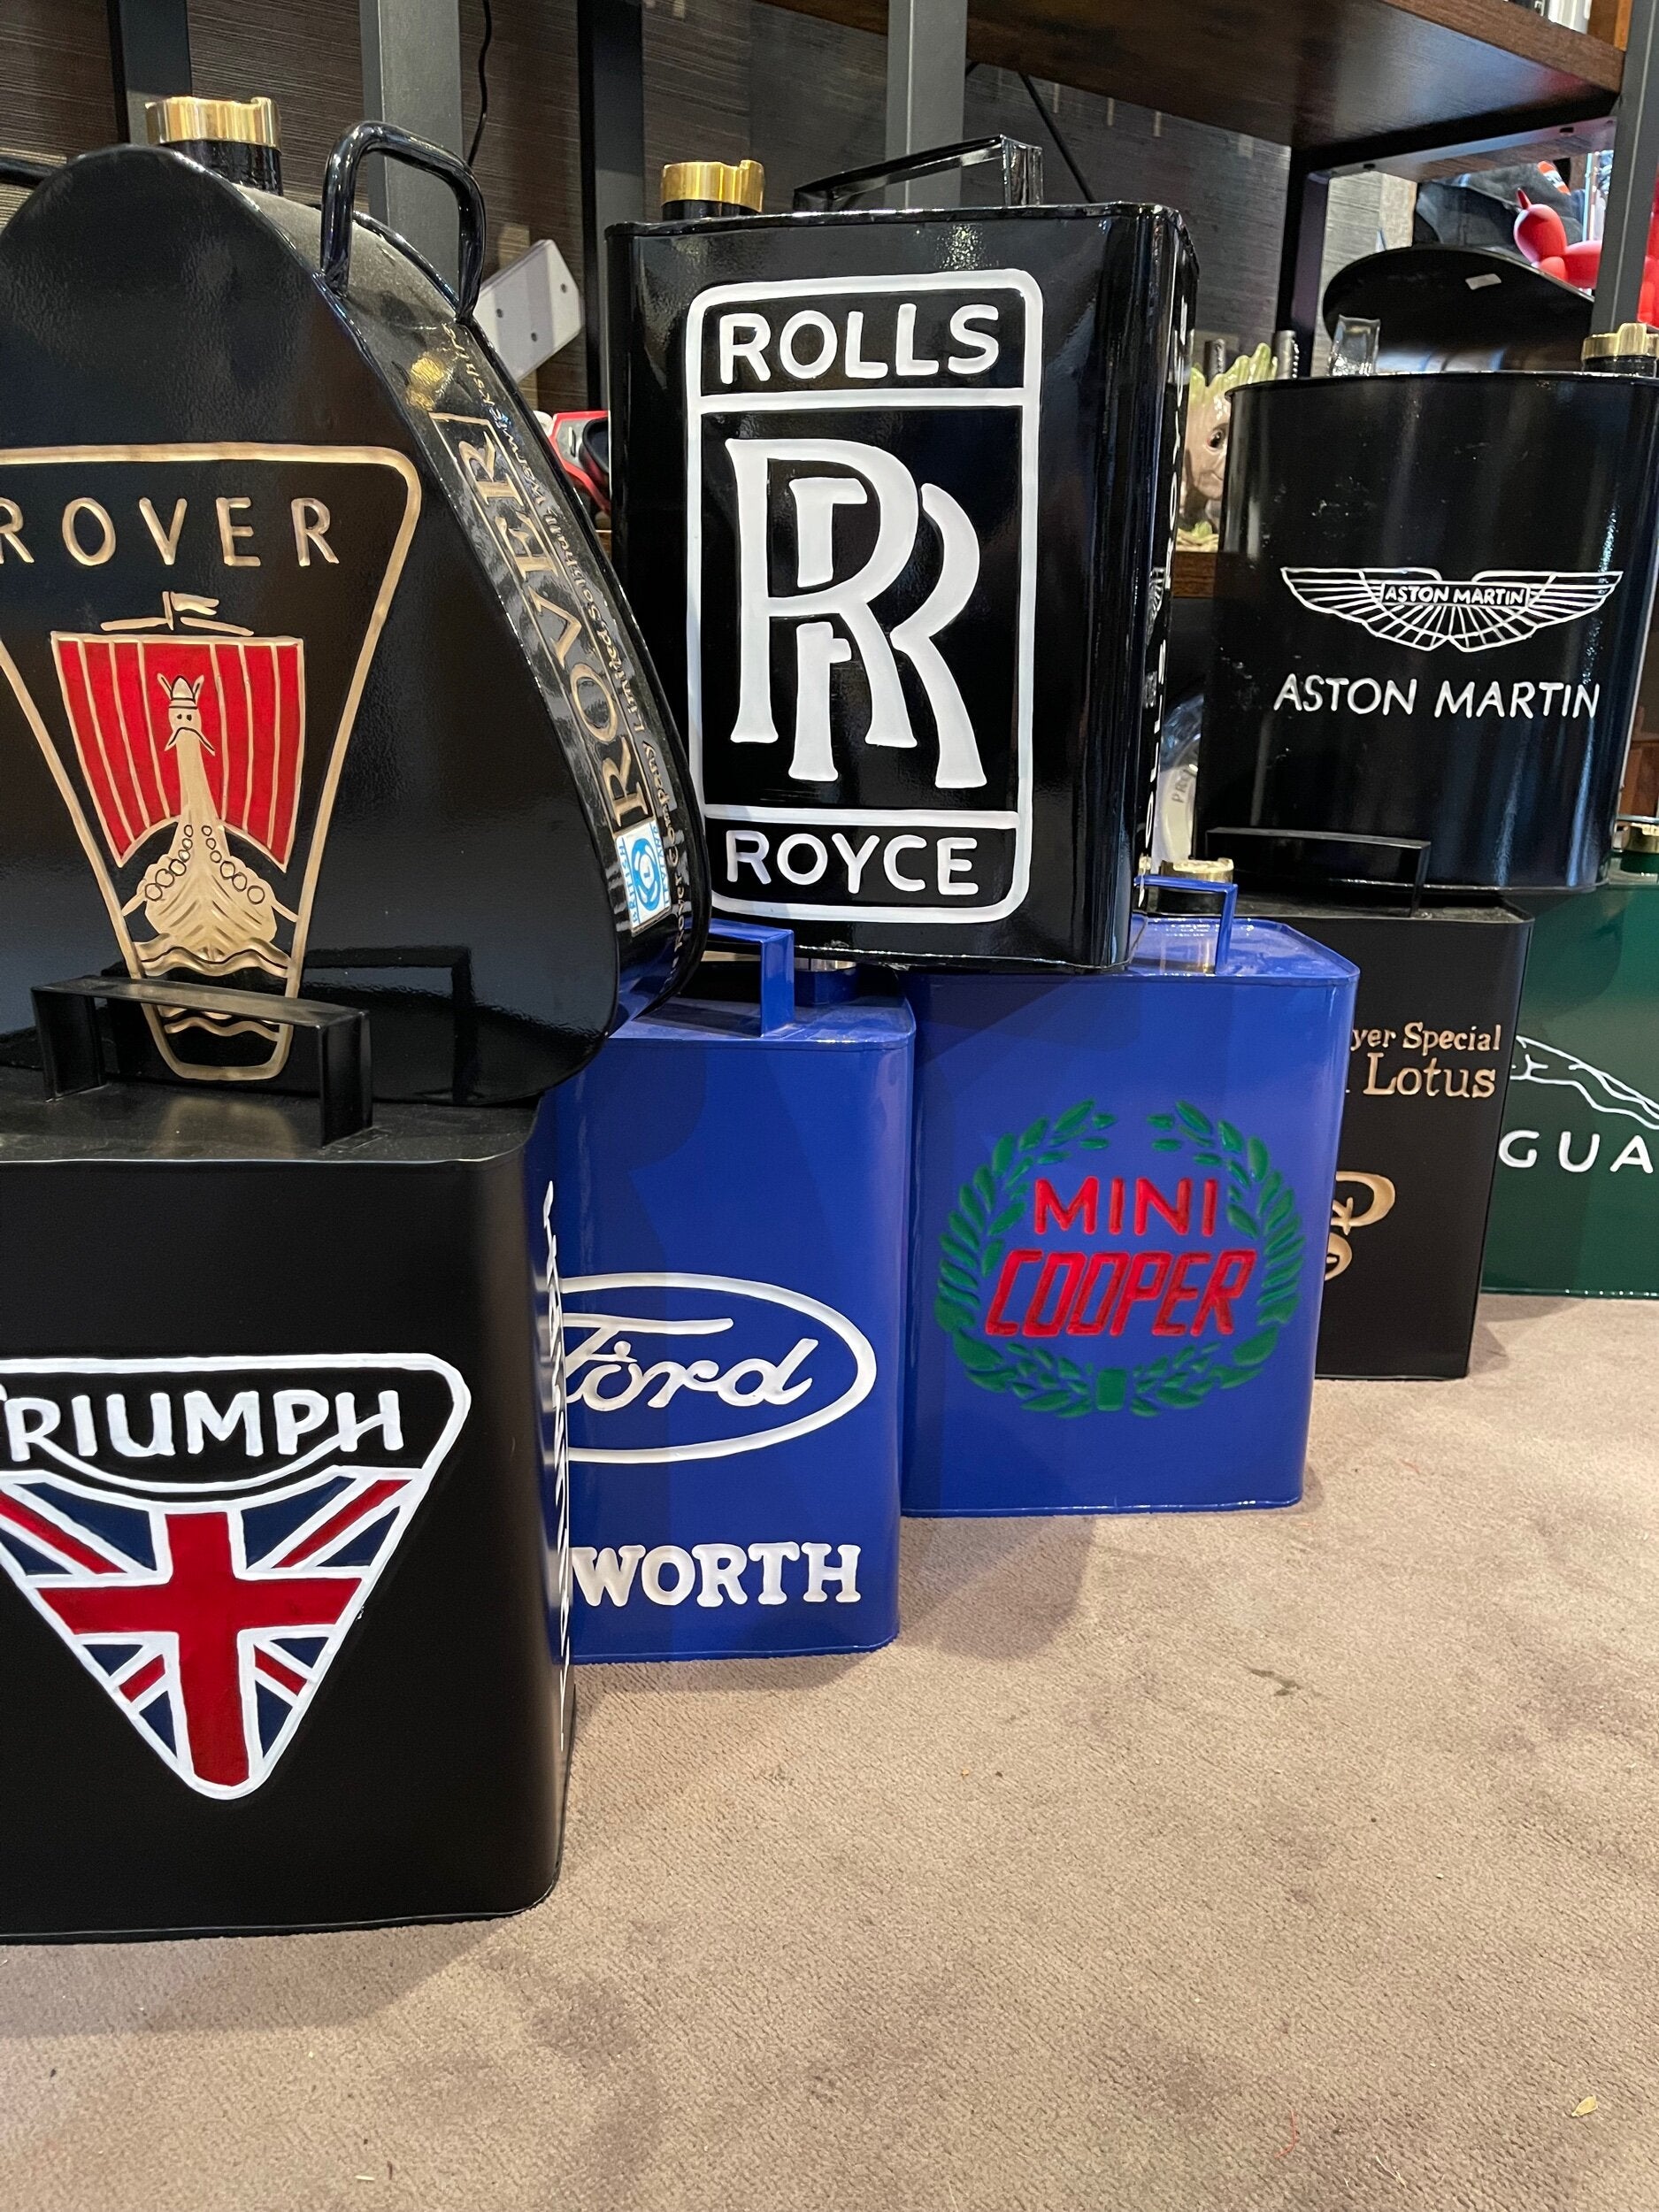 LARGE RETRO VINTAGE STYLE OIL / PETROL CANS various designs makes